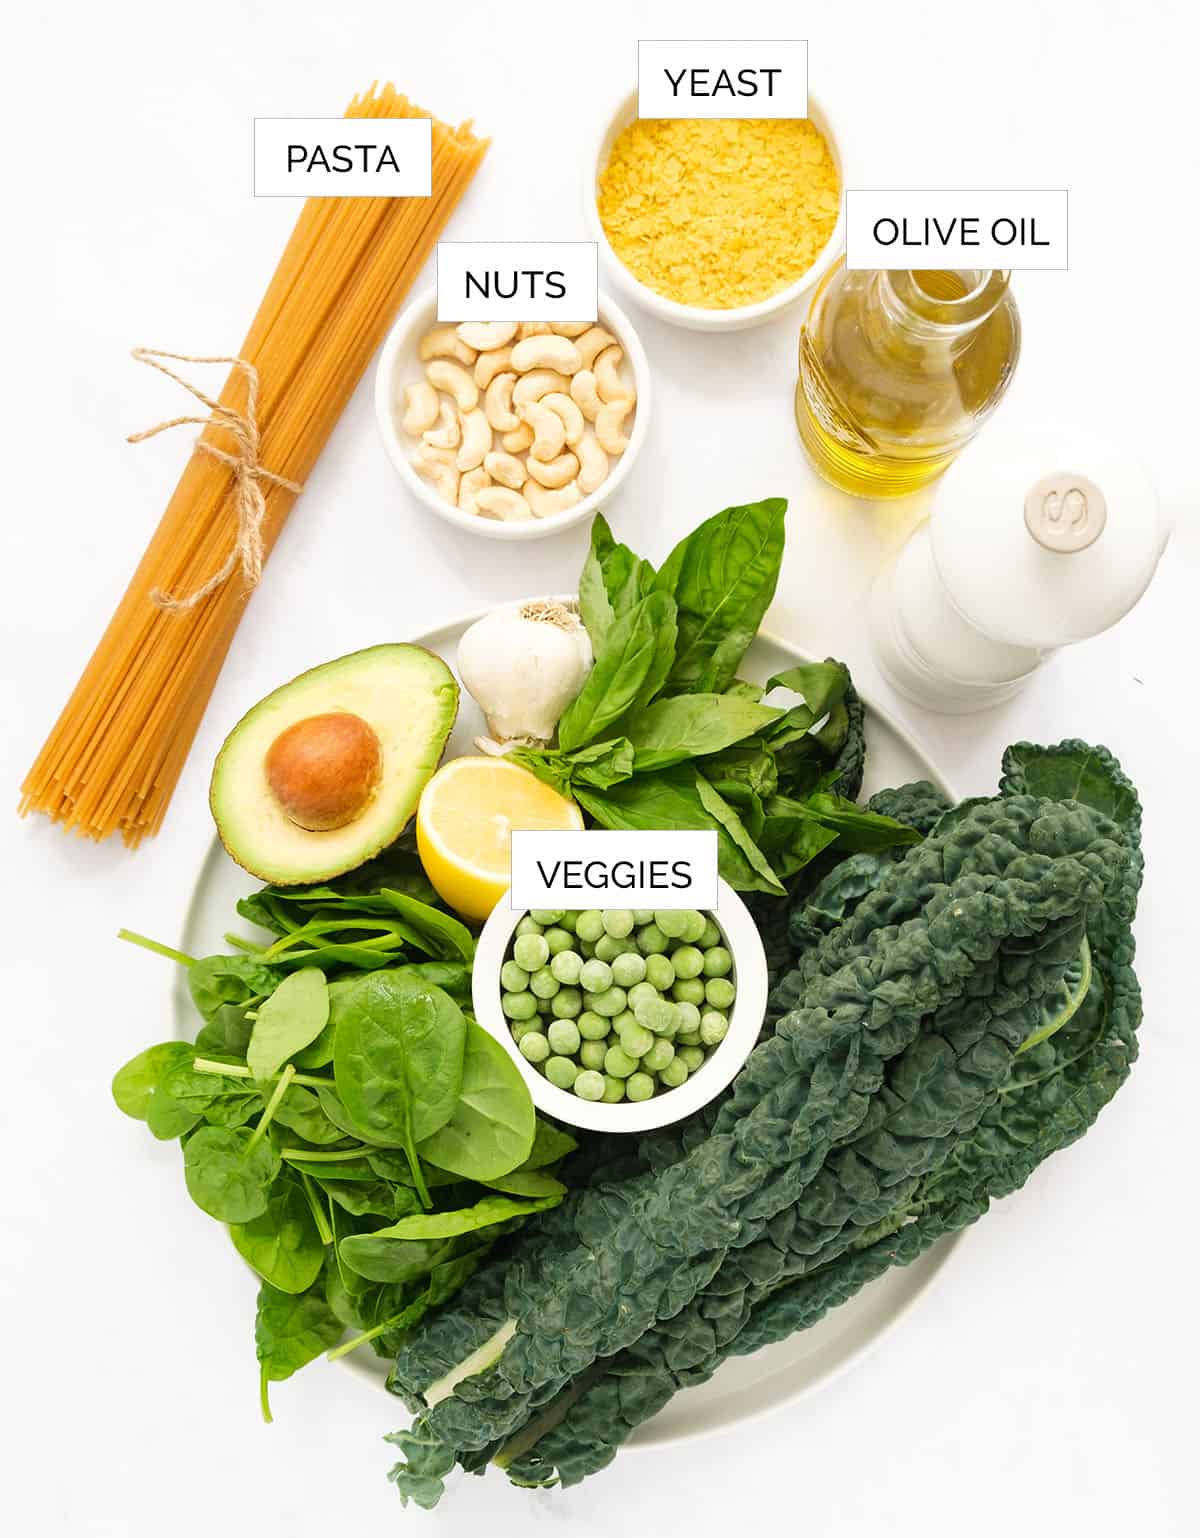 The ingredients to make this healthy spaghetti are arranged over a white background.